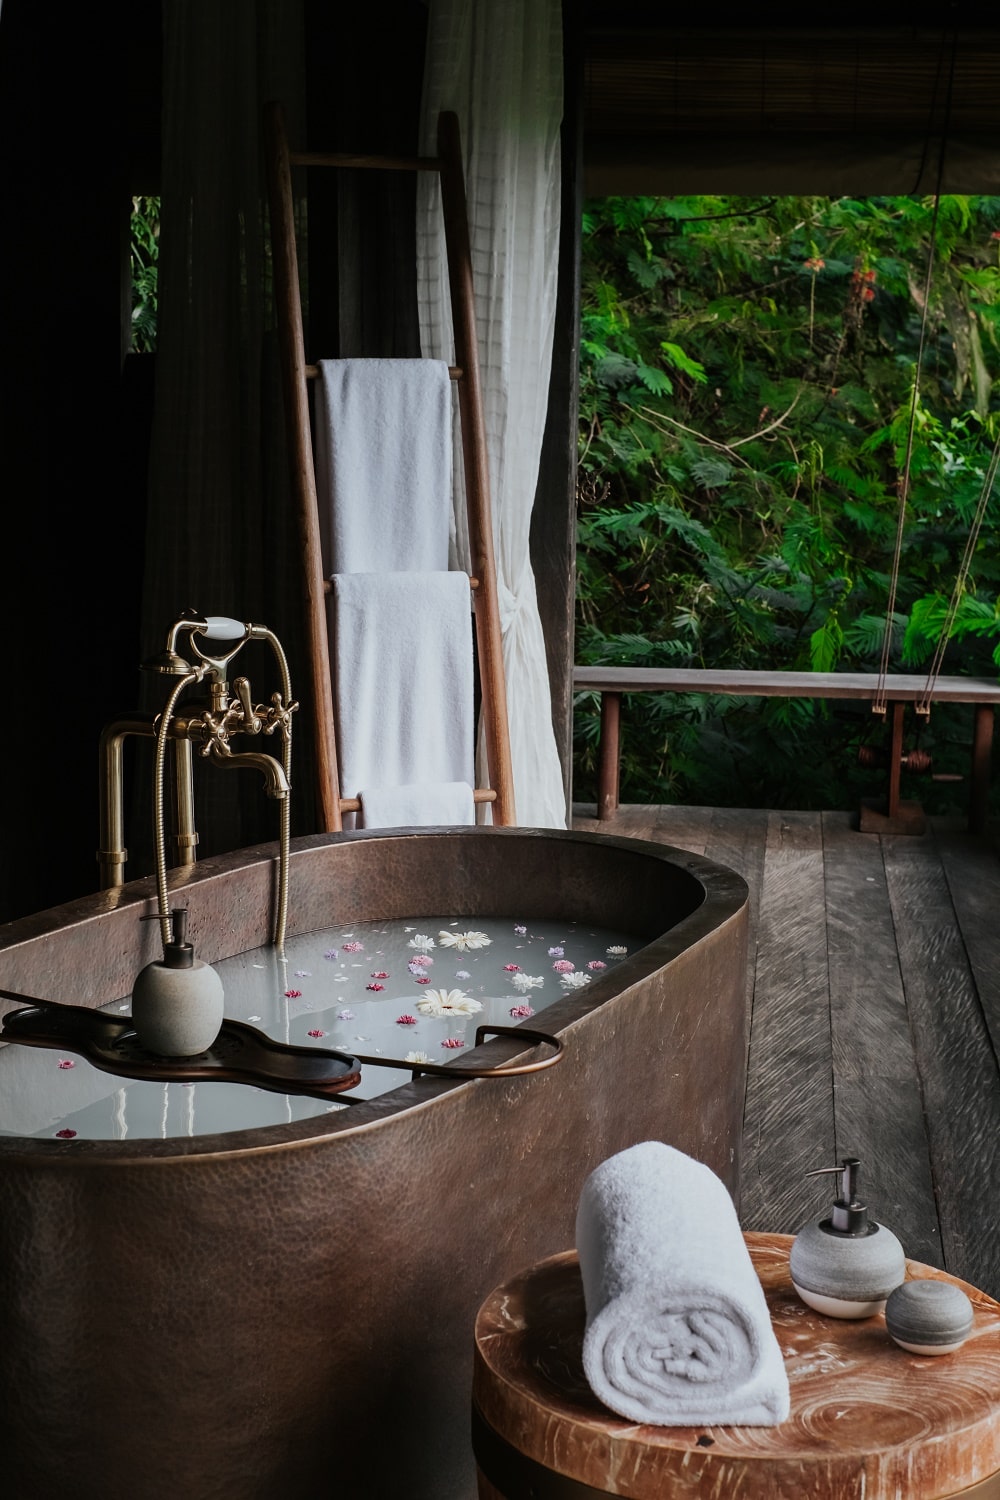 BANYAN TREE DEBUTS ITS FIRST BANYAN TREE ESCAPE IN BALI, INDONESIA